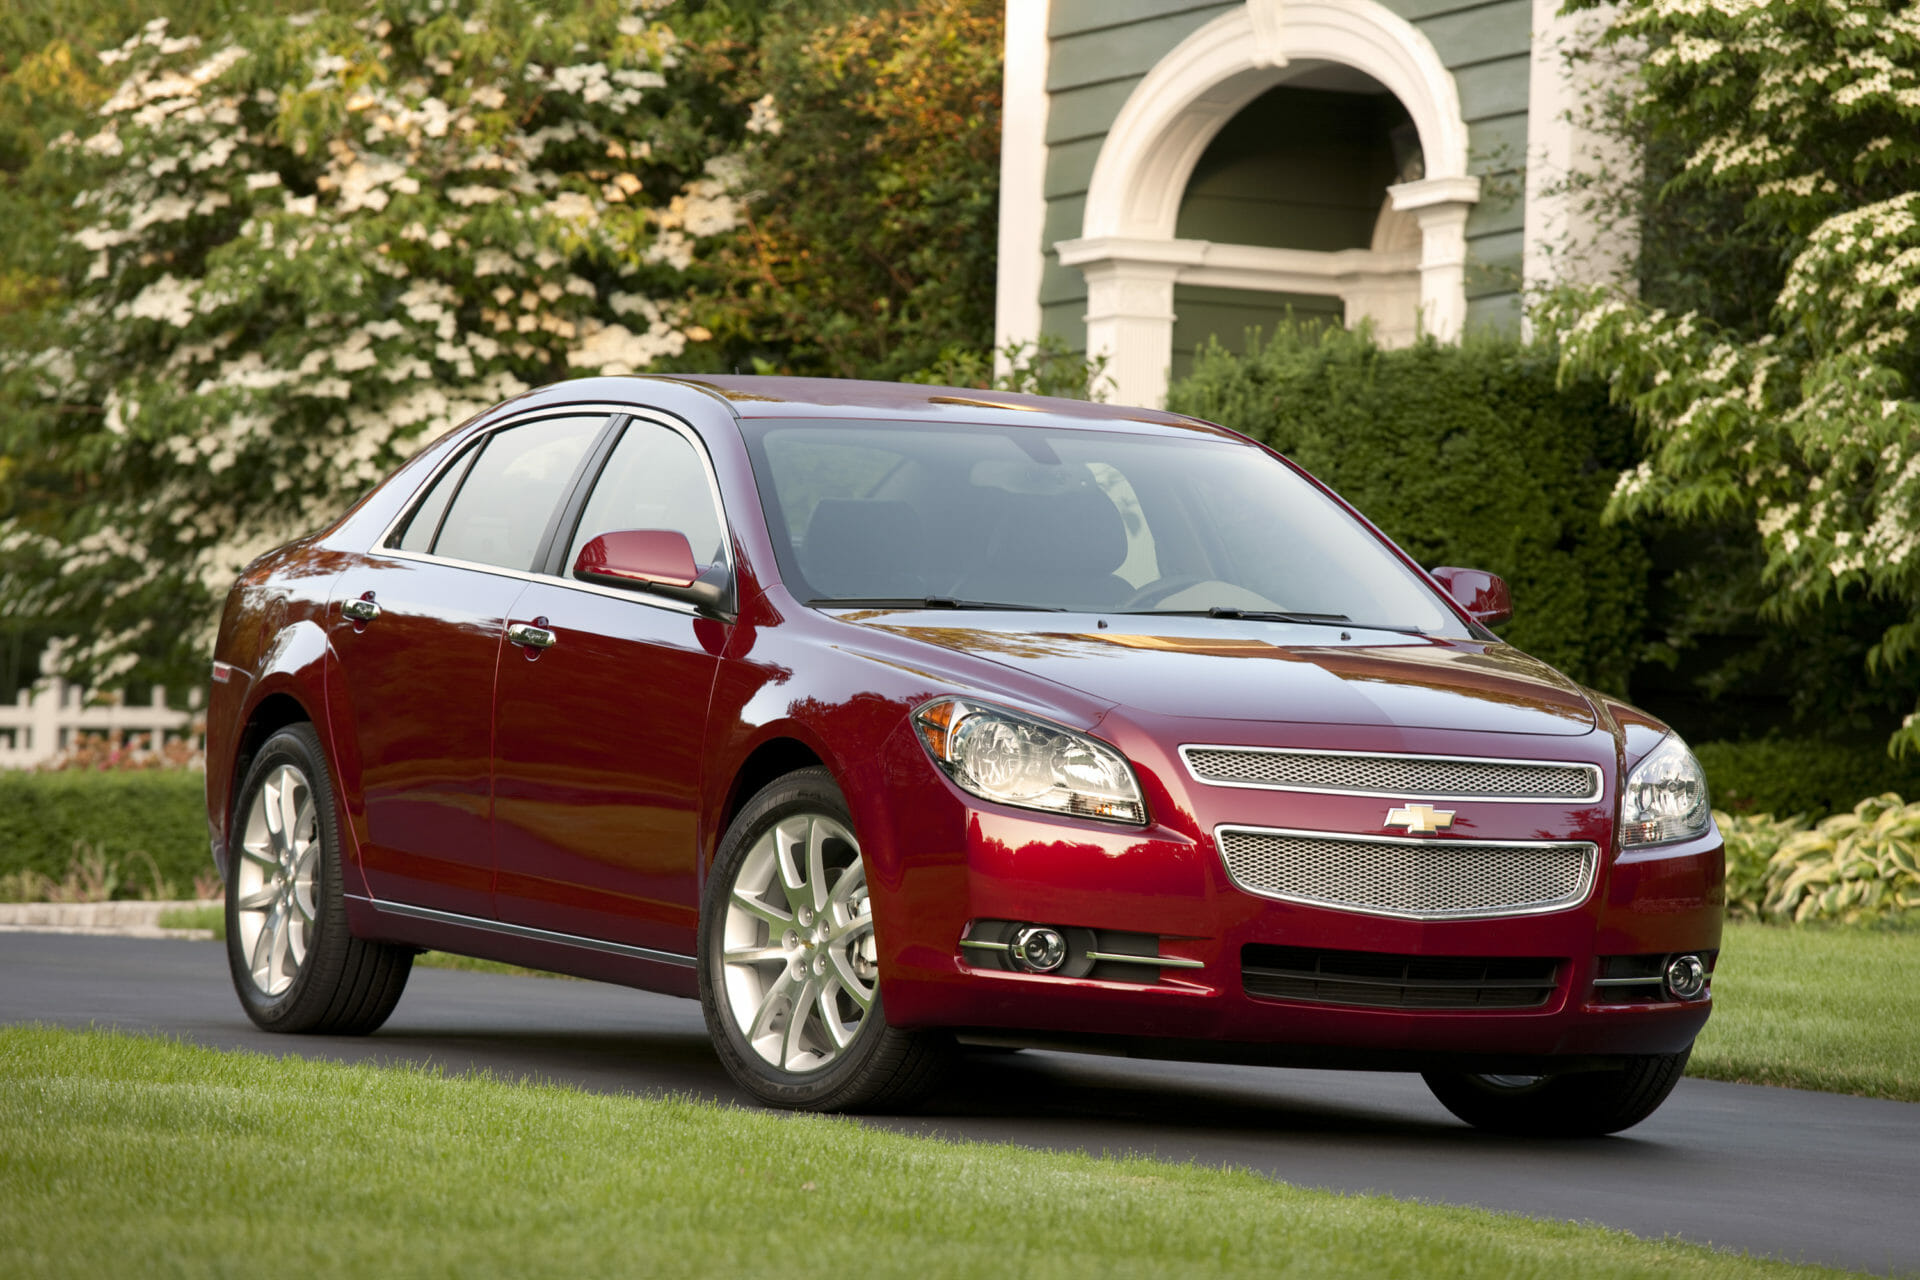 2011 Chevrolet Malibu Review: A Midsize Sedan Loaded with Mechanical Issues